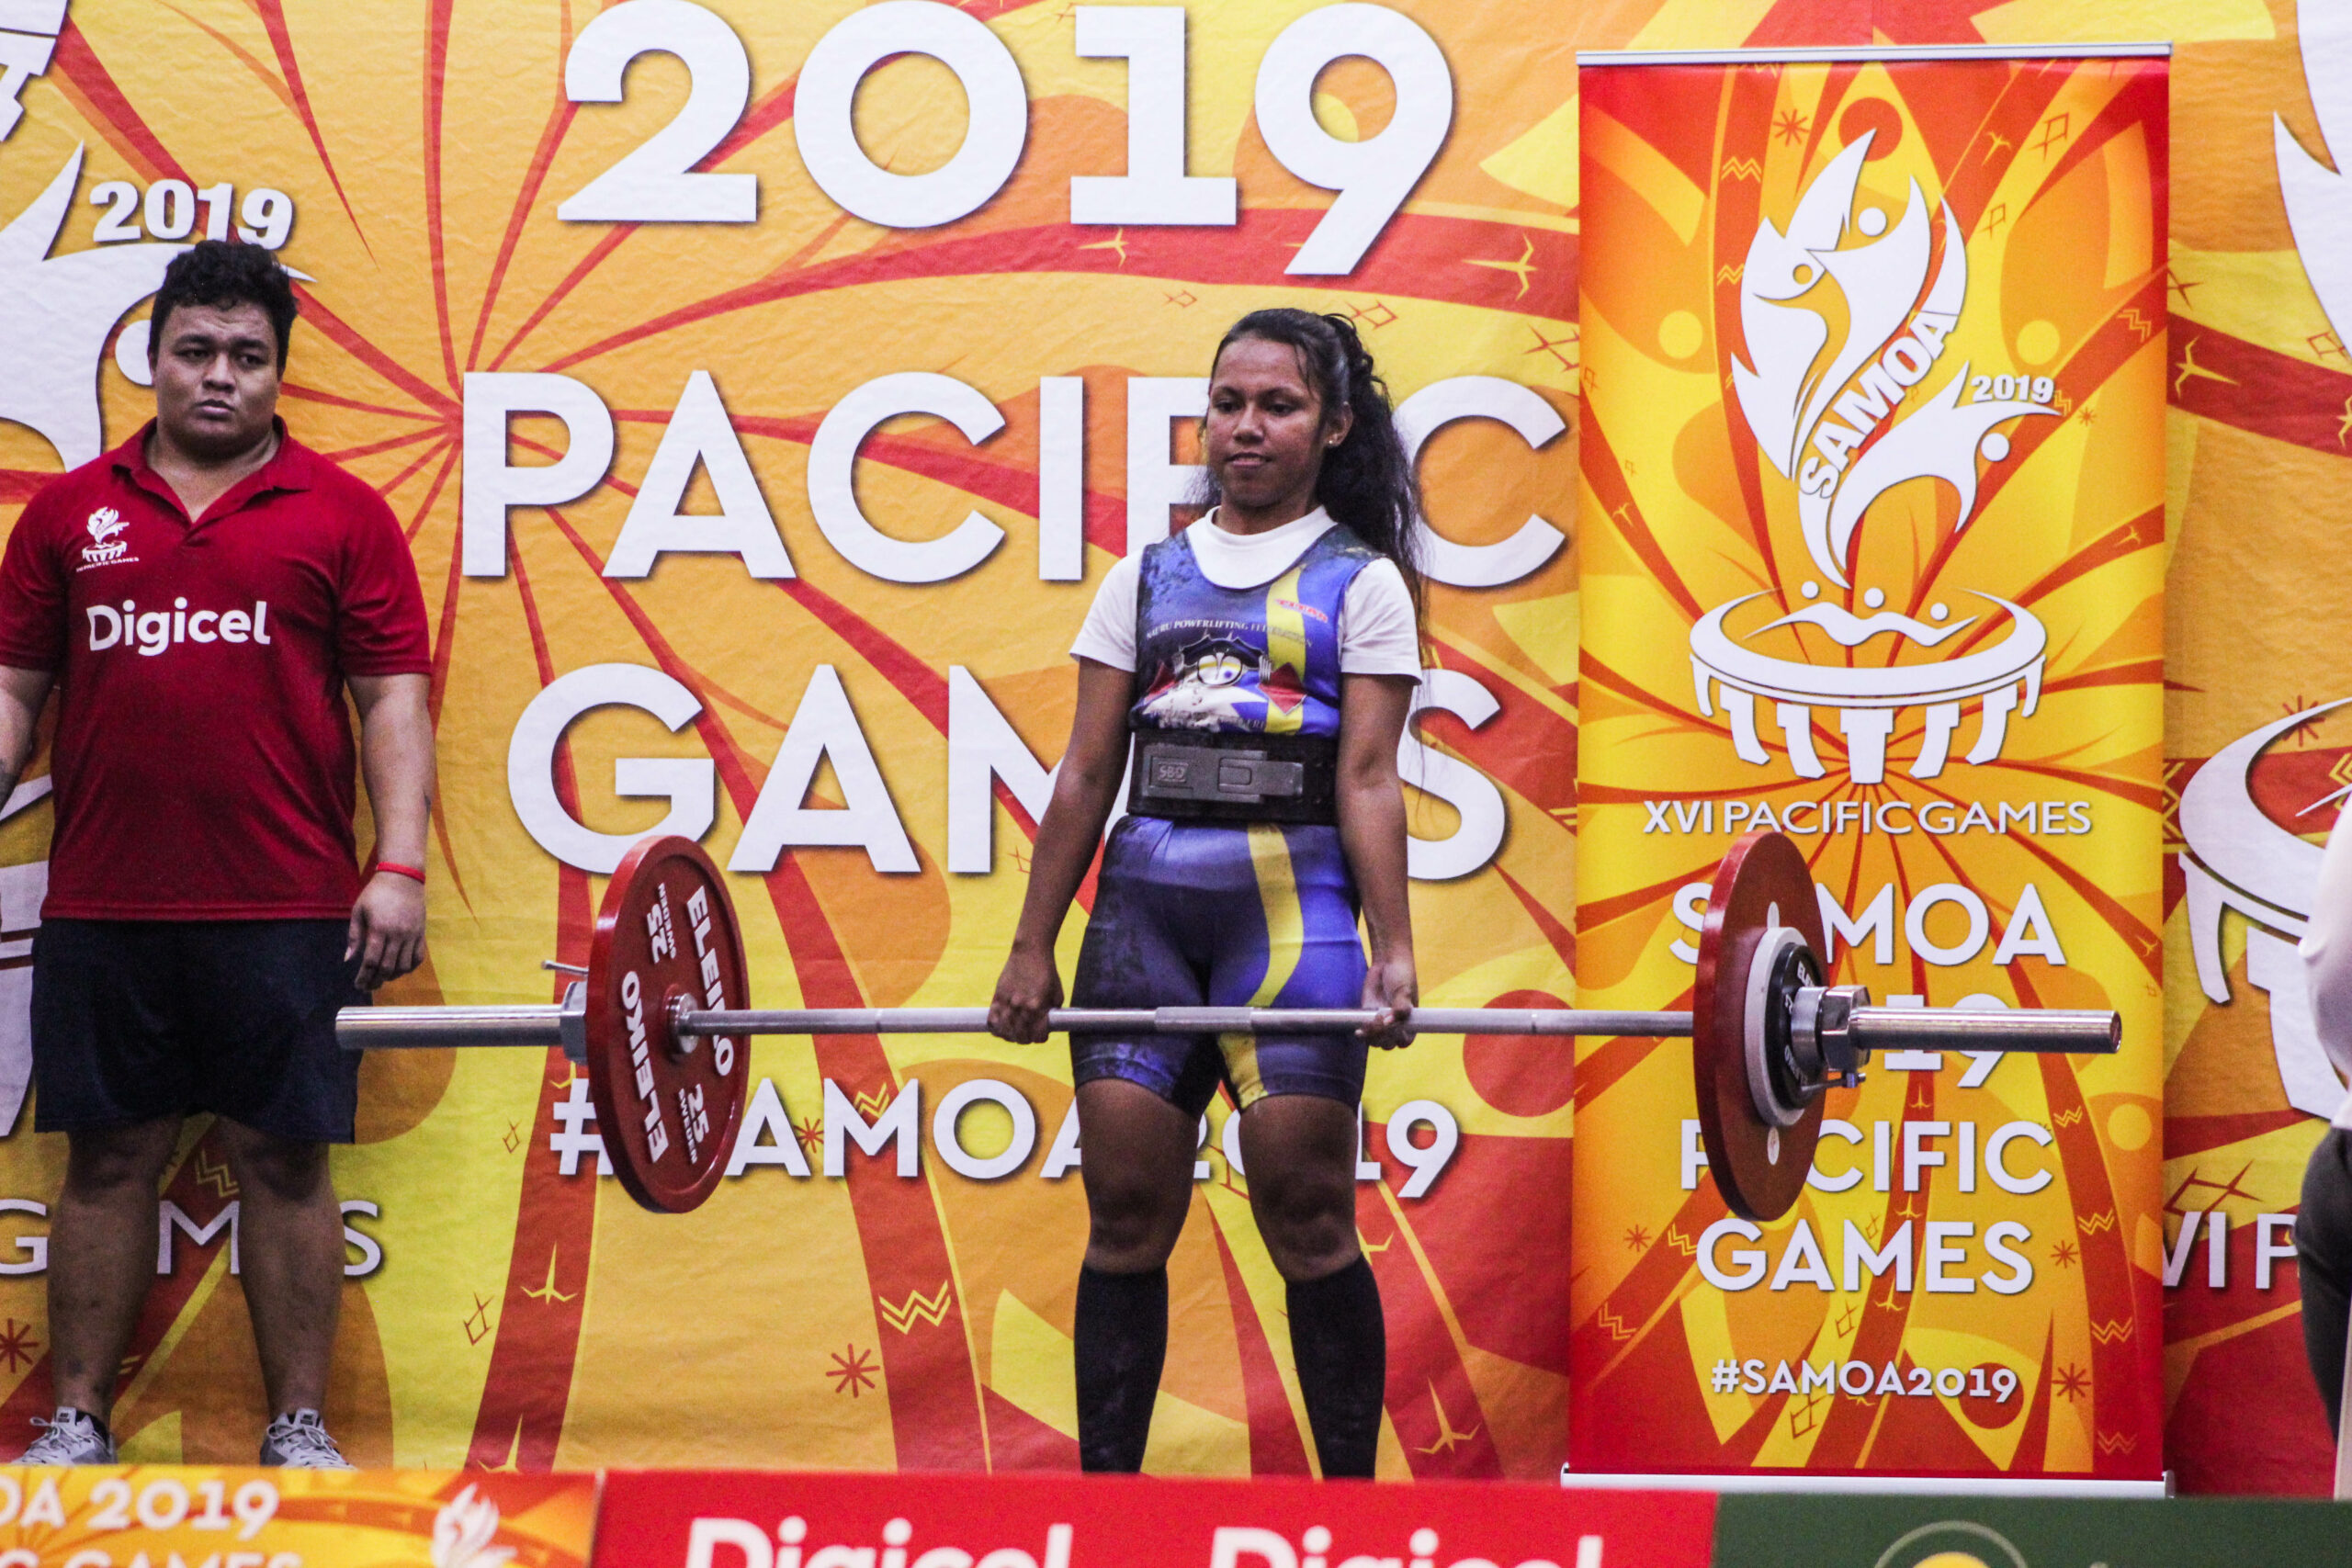 A woman competing in powerlifting